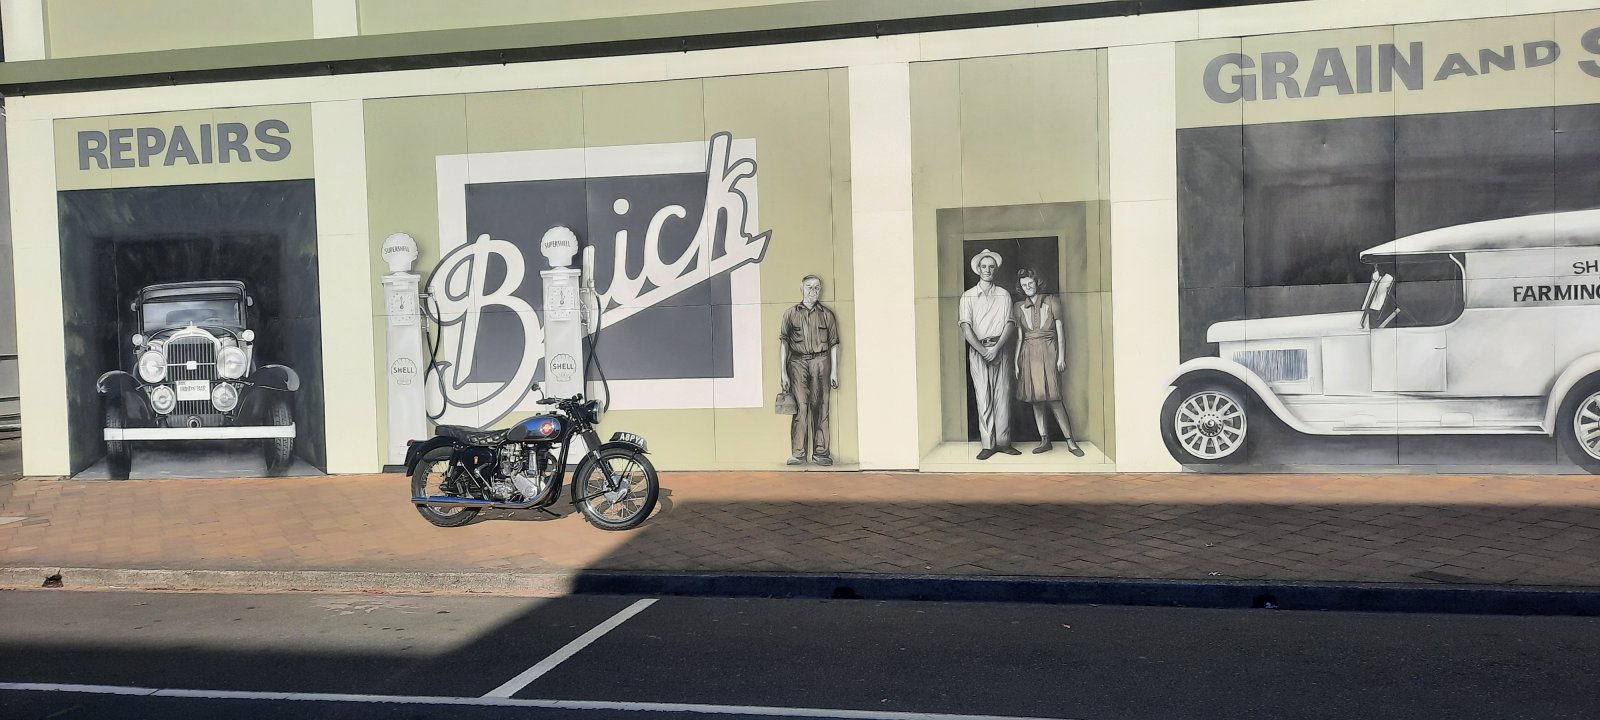 Cool Vintage Mural, with my Bsa .